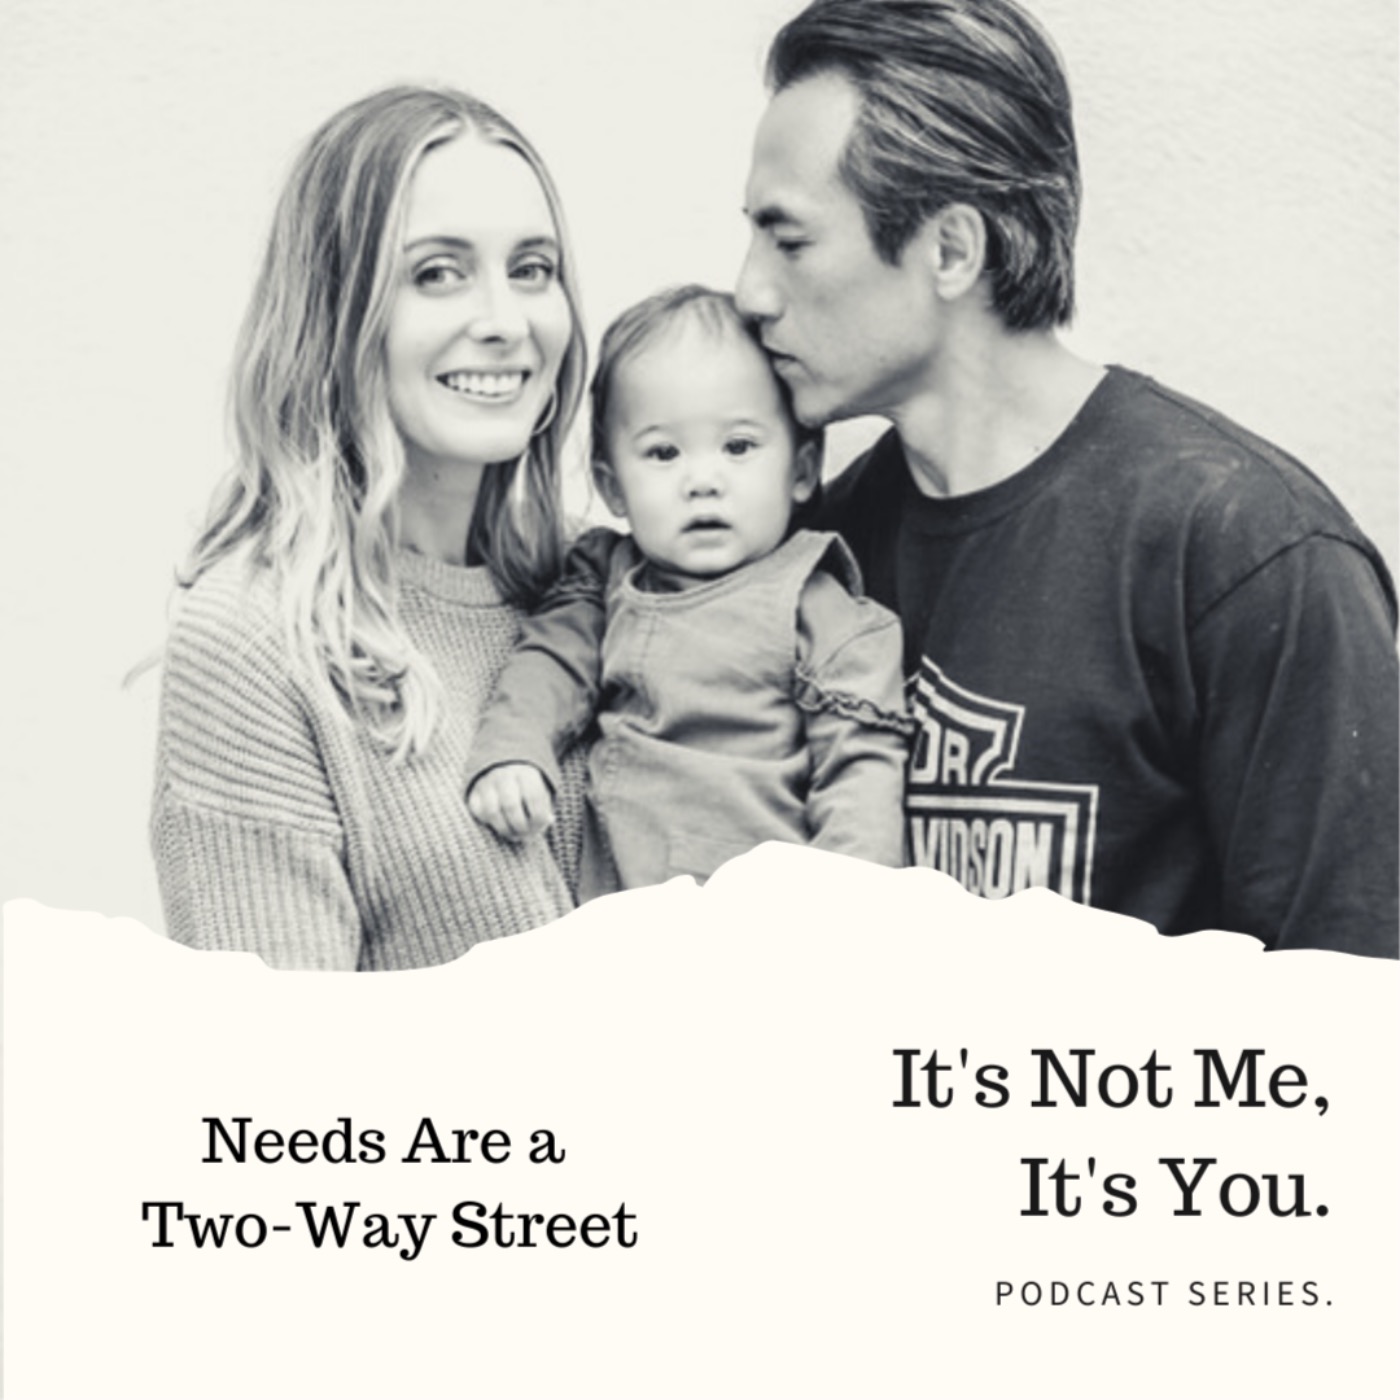 It's Not Me, It's You: Needs Are a Two-Way Street